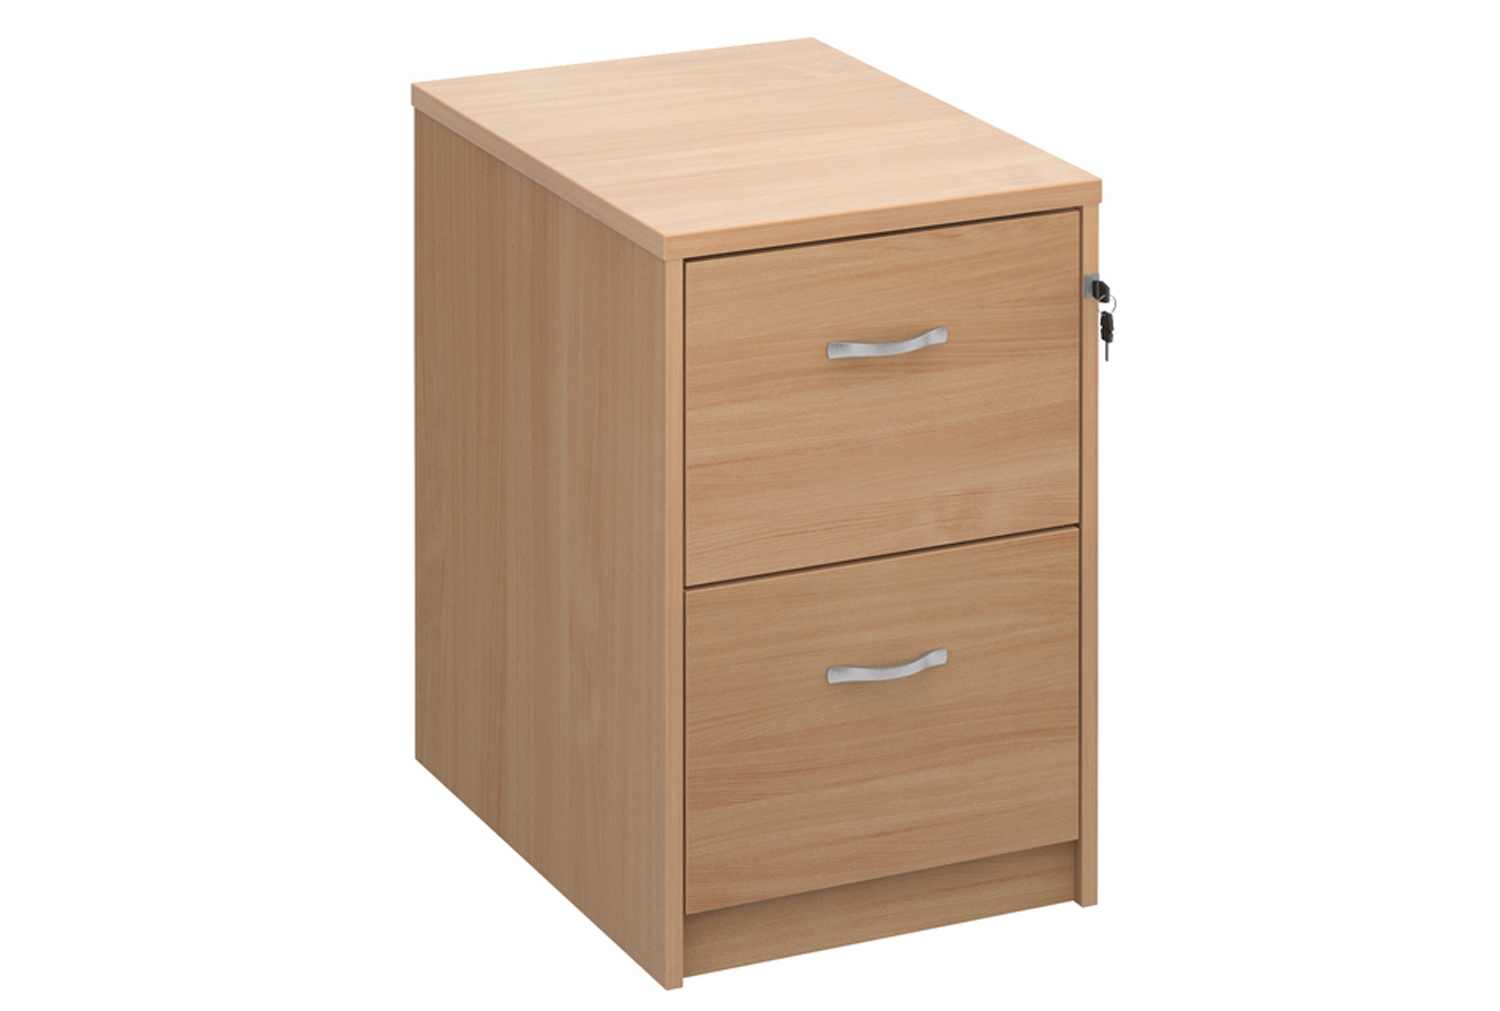 Tully Filing Cabinets, 2 Drawer - 48wx66dx73h (cm), Beech, Fully Installed